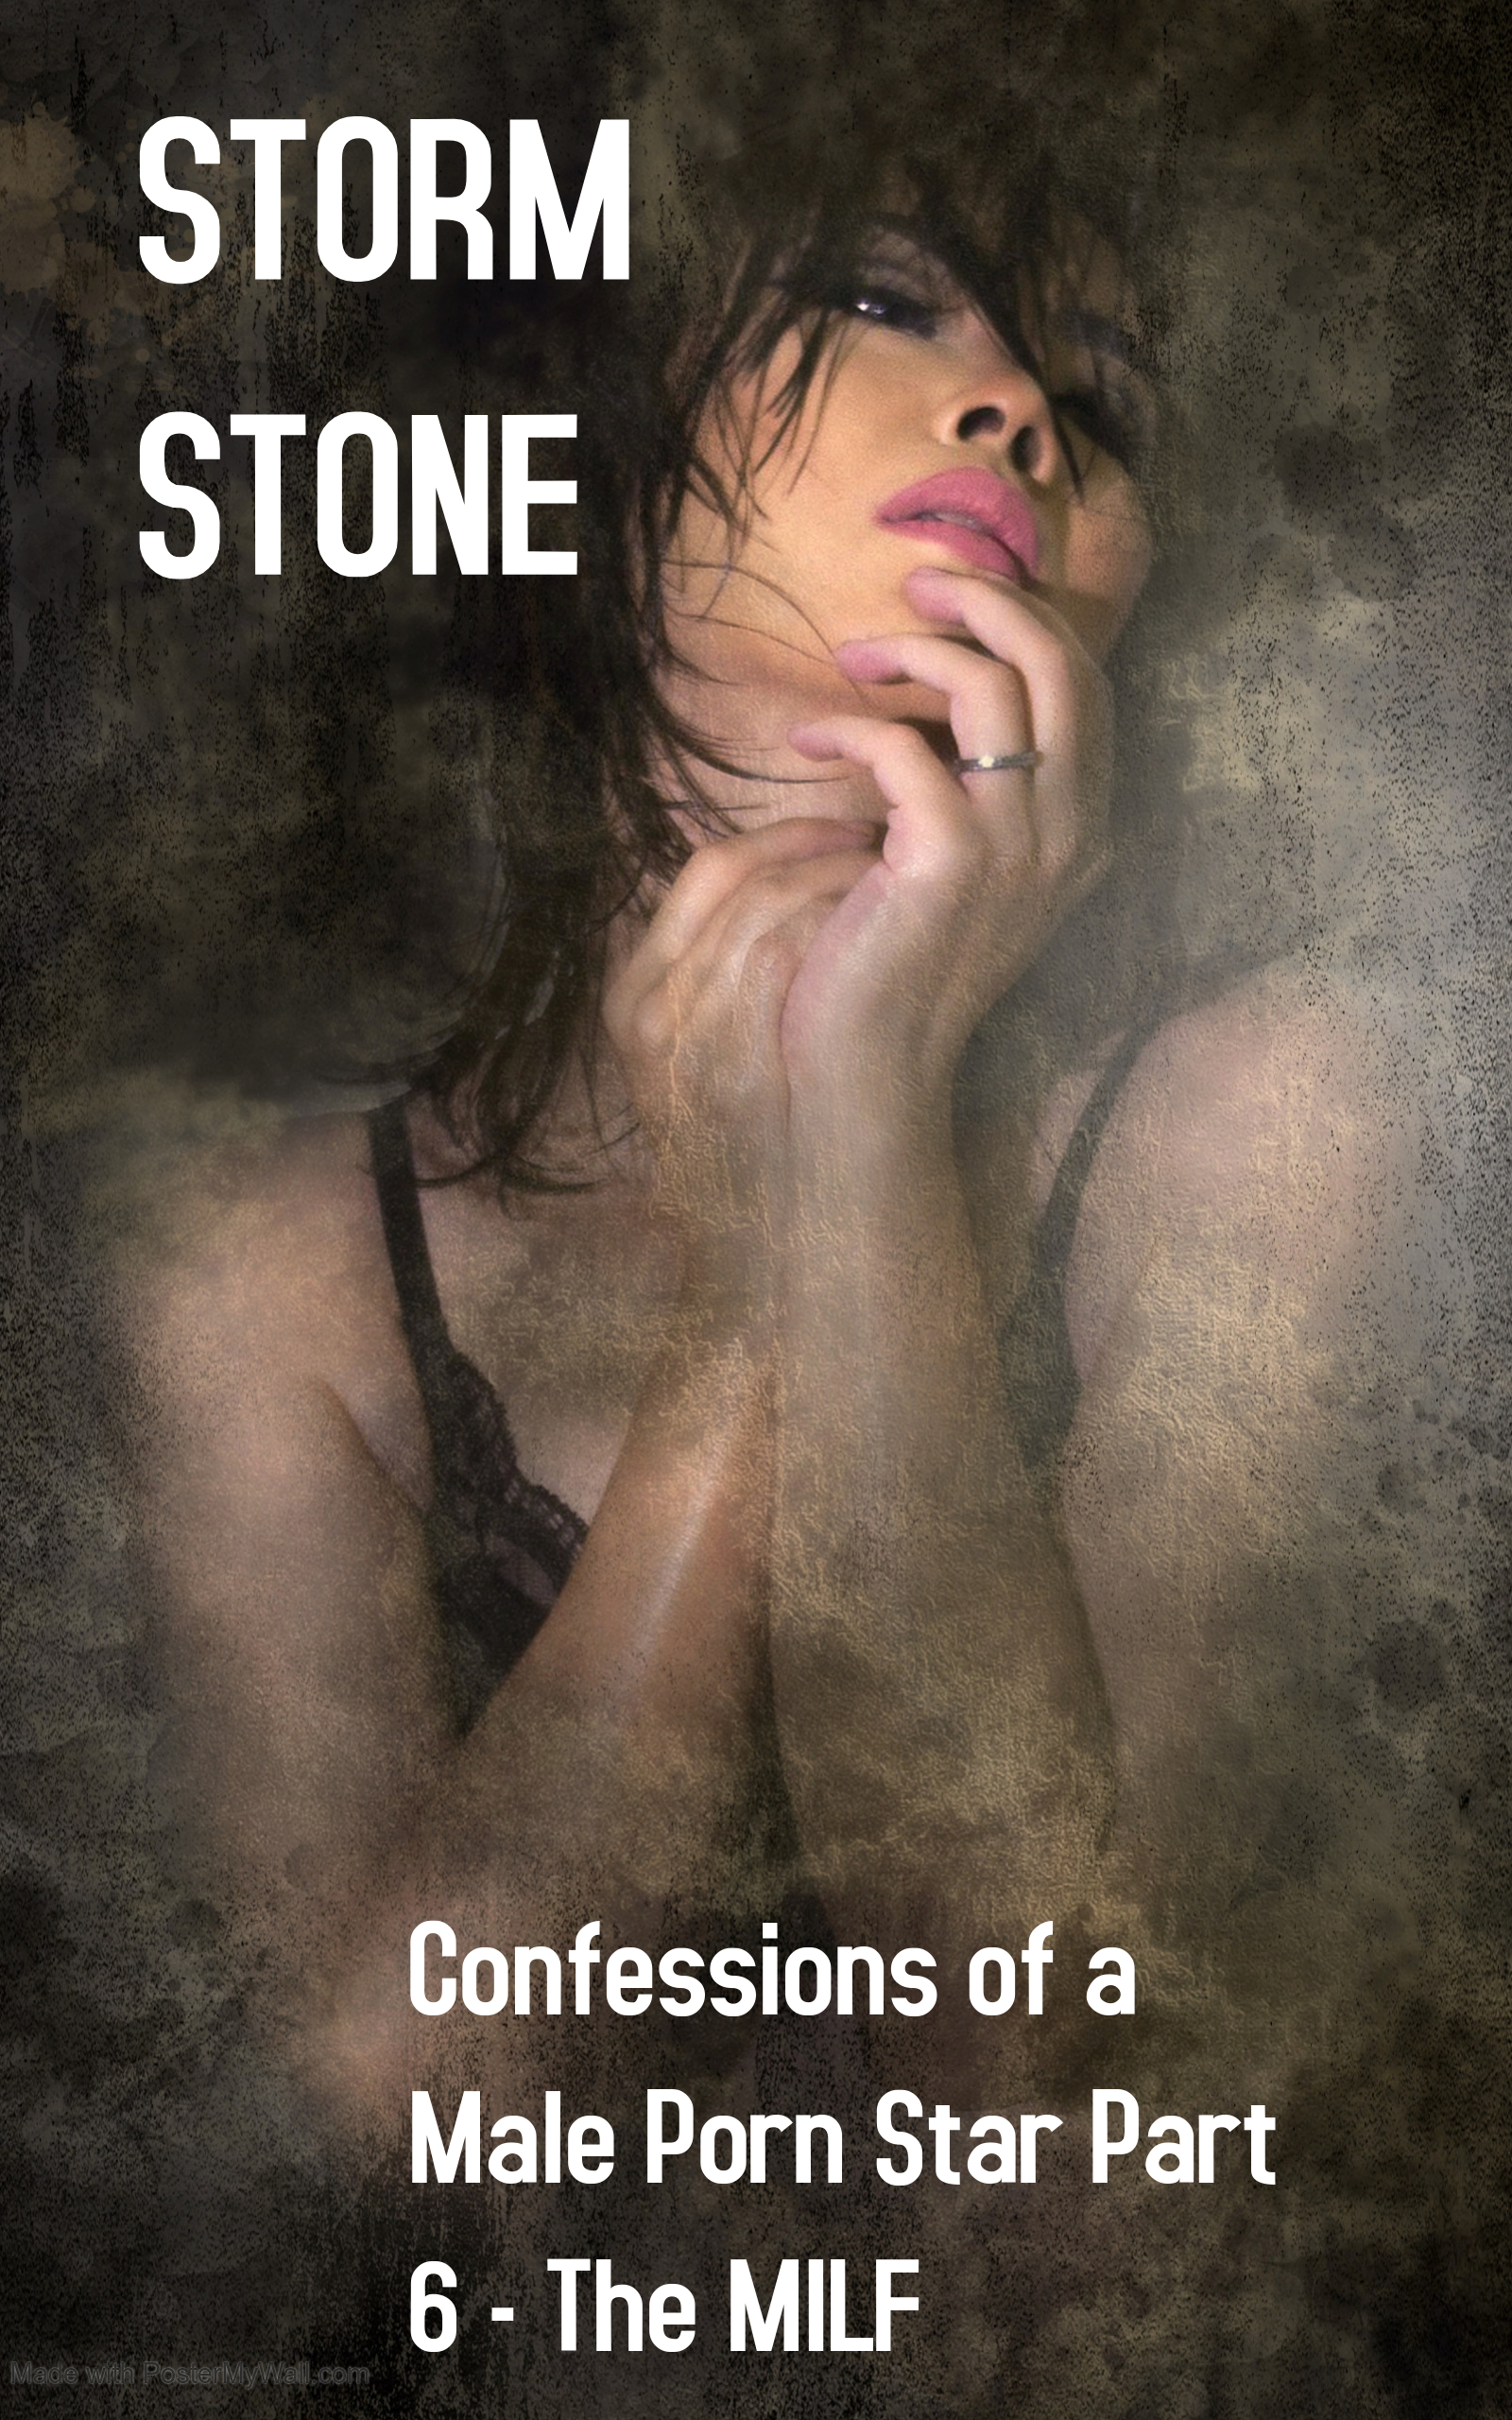 Milf Book - Smashwords â€“ Confessions of a Male Porn Star Part 6 The MILF â€“ a book by  Storm Stone